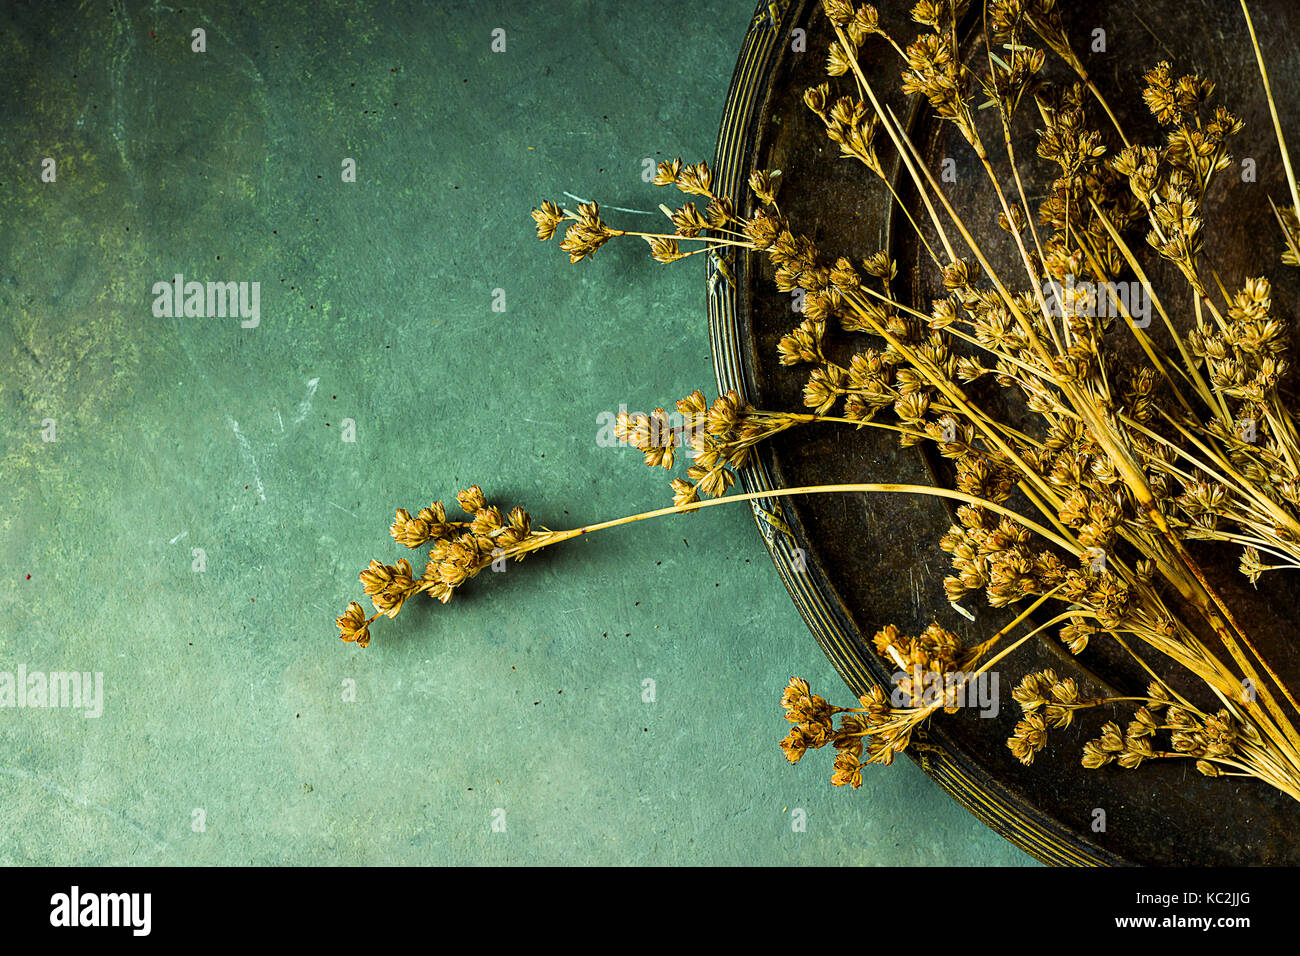 Dry flowers on vintage old metal dish. Dark stone concrete background. Copy space for text. Cozy fall atmosphere, moody. Stock Photo